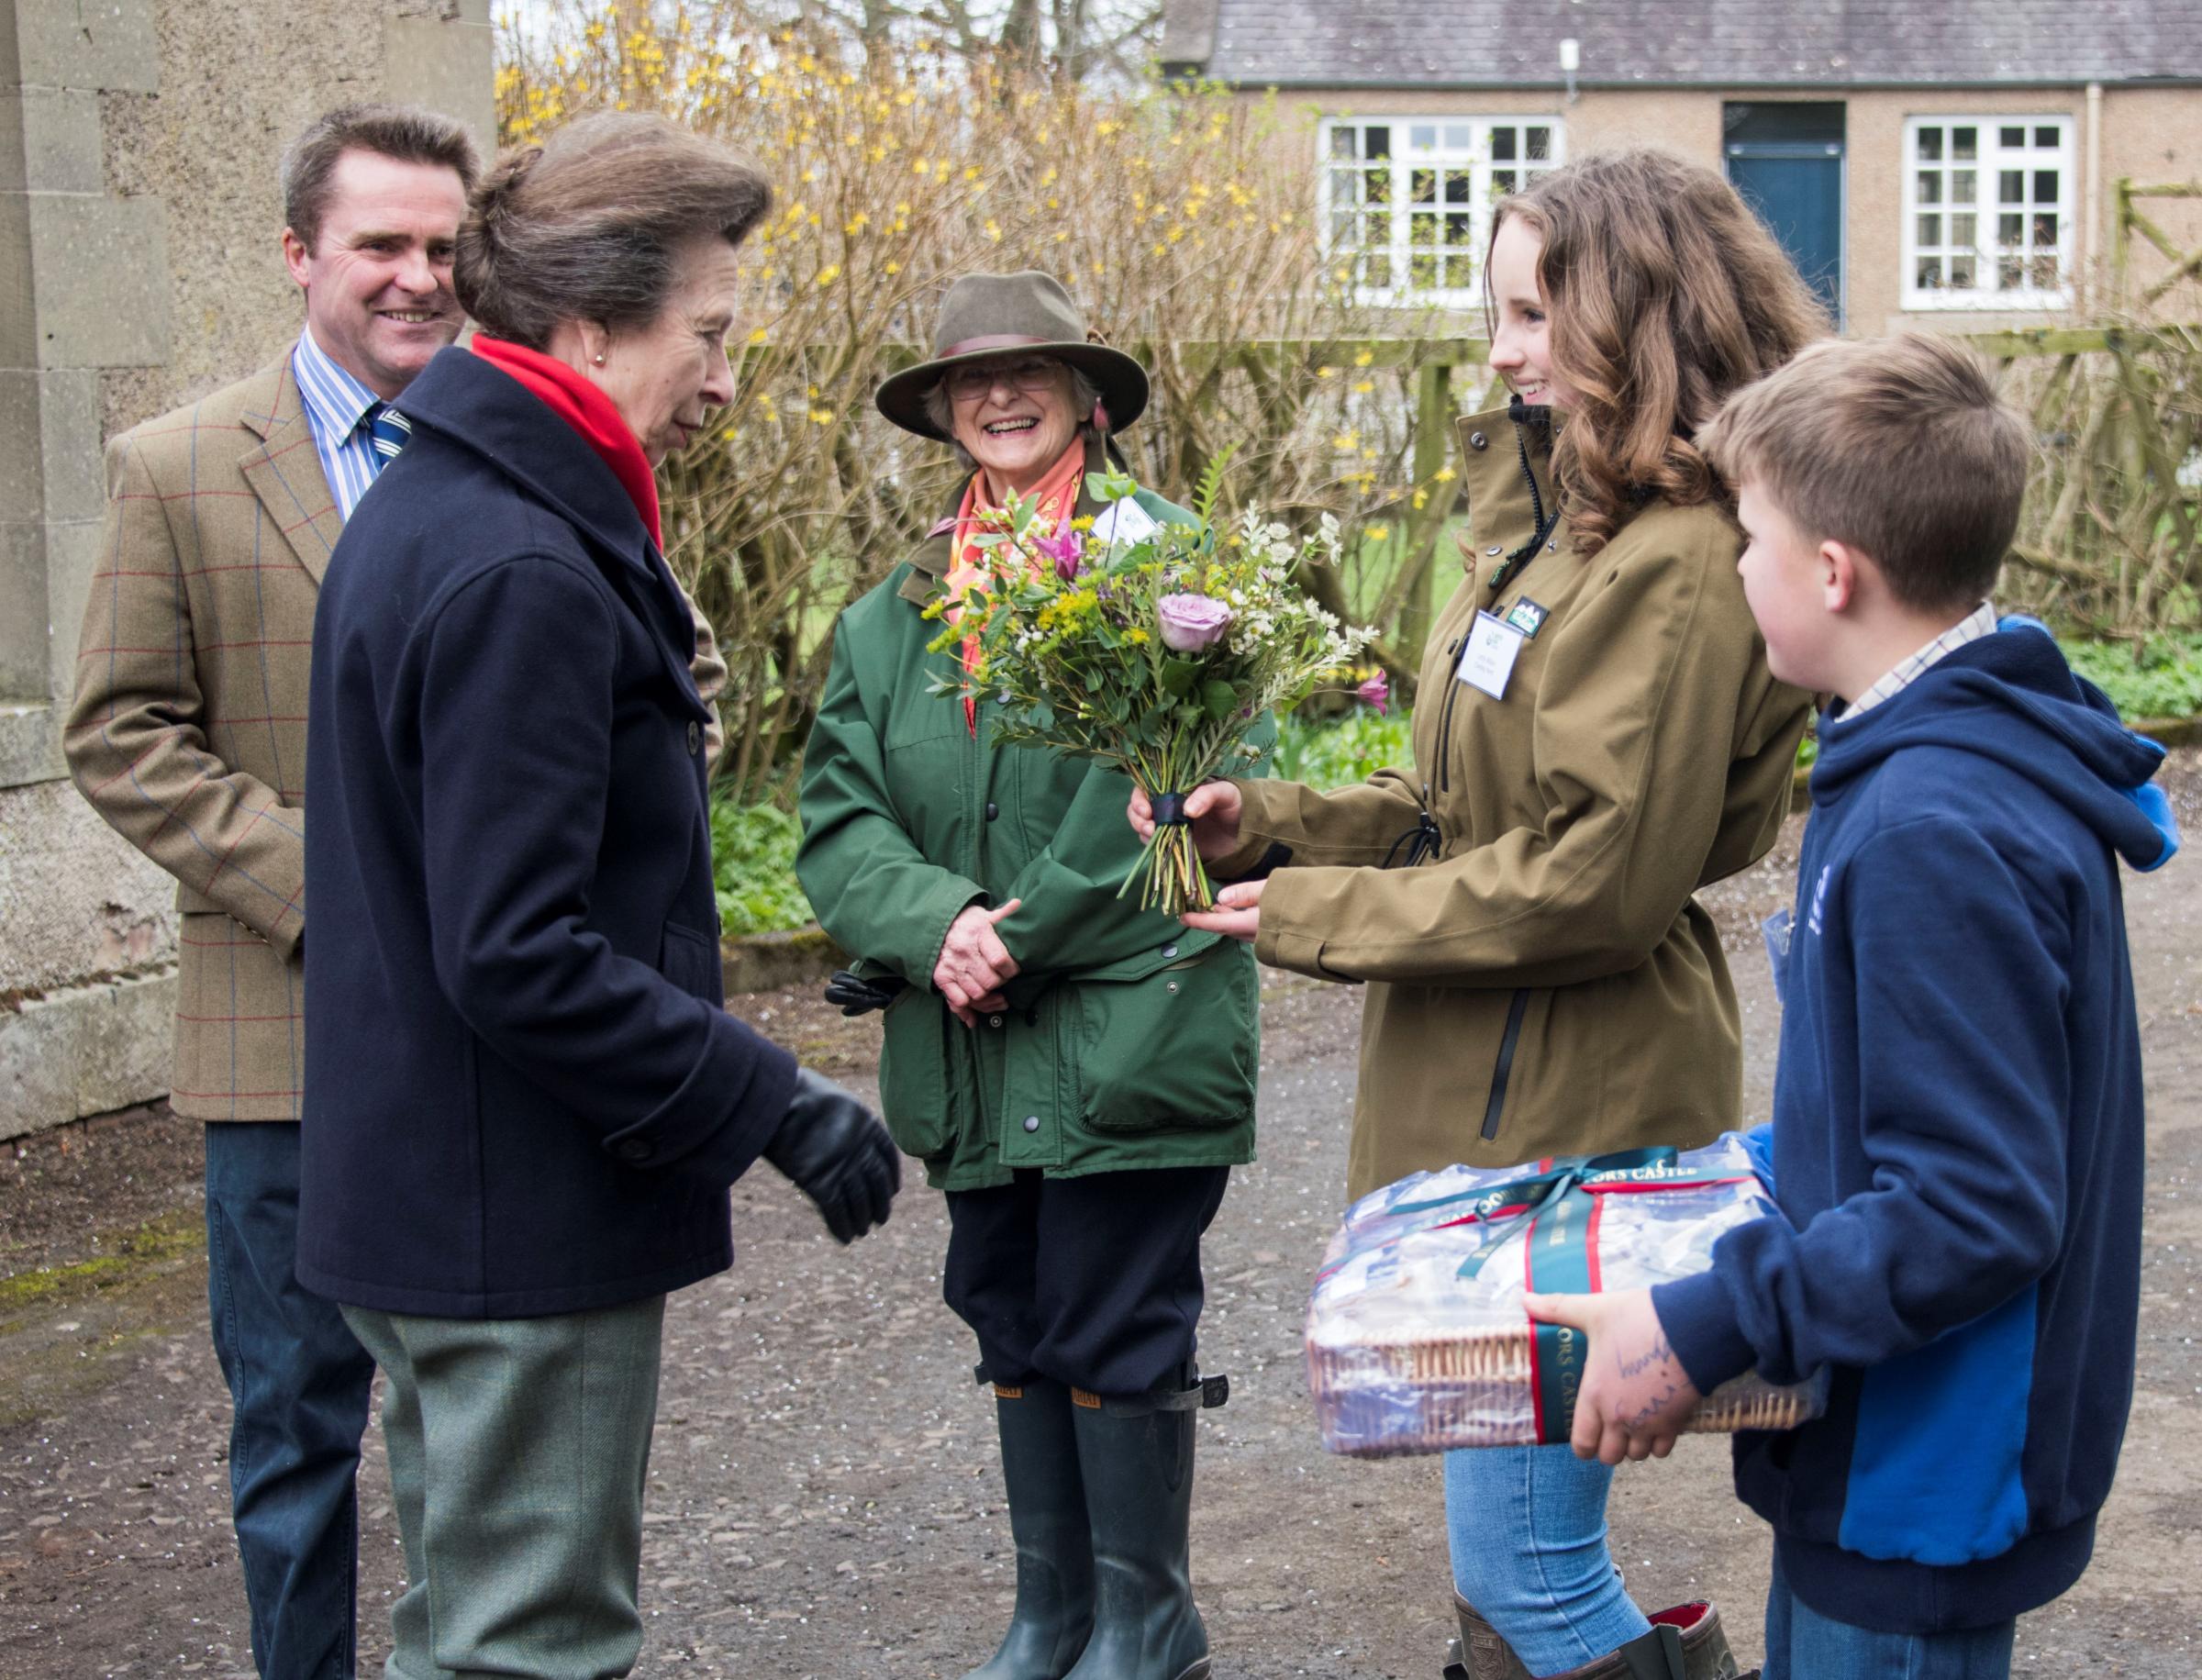 At Cowbog Robert with his mother, Joan, look on as HRH The Princess Royal is presented with gifts from Lottie and Henry Wilson